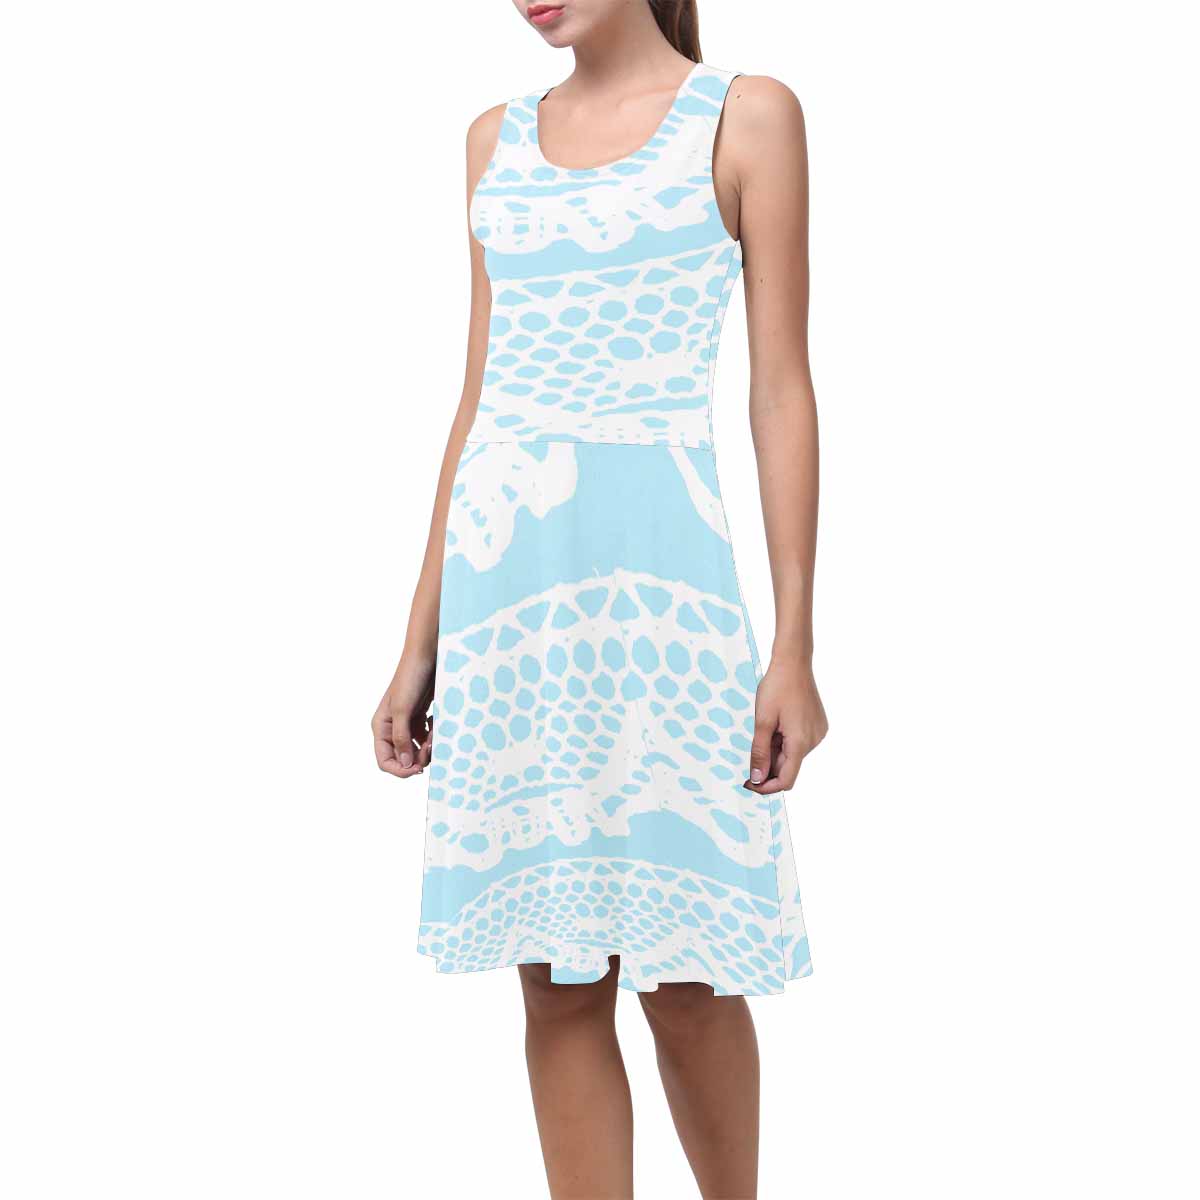 Victorian printed lace summer dress, Design 08